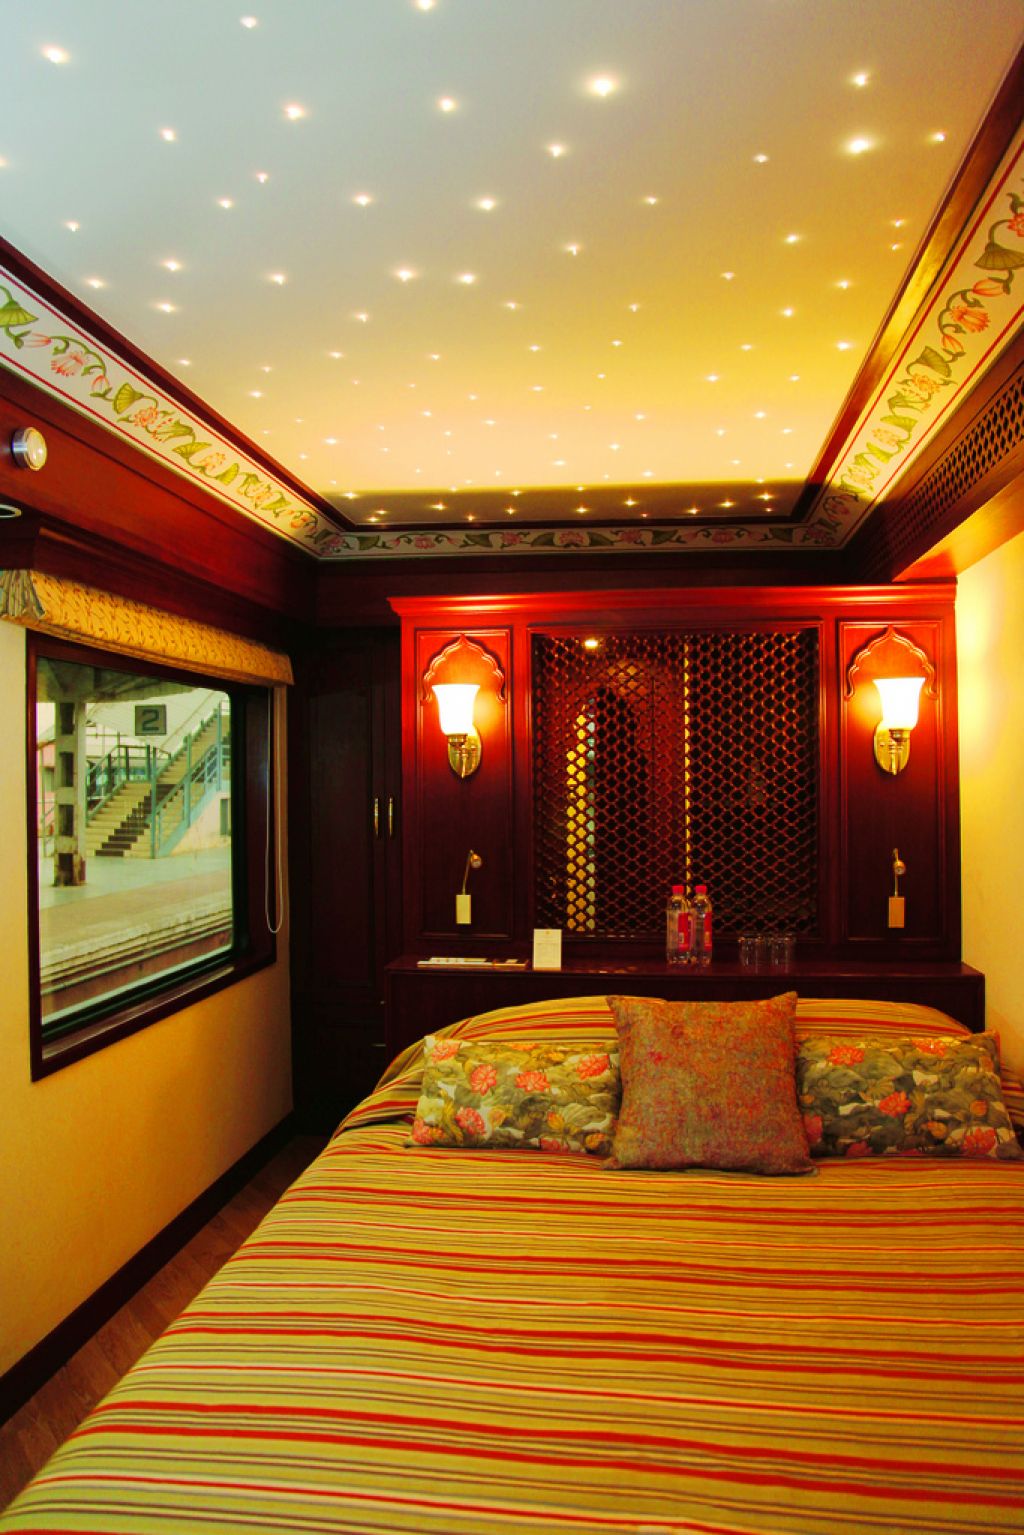 maharaja express10 Maharajas Express   One of the Most Luxurious Trains in World